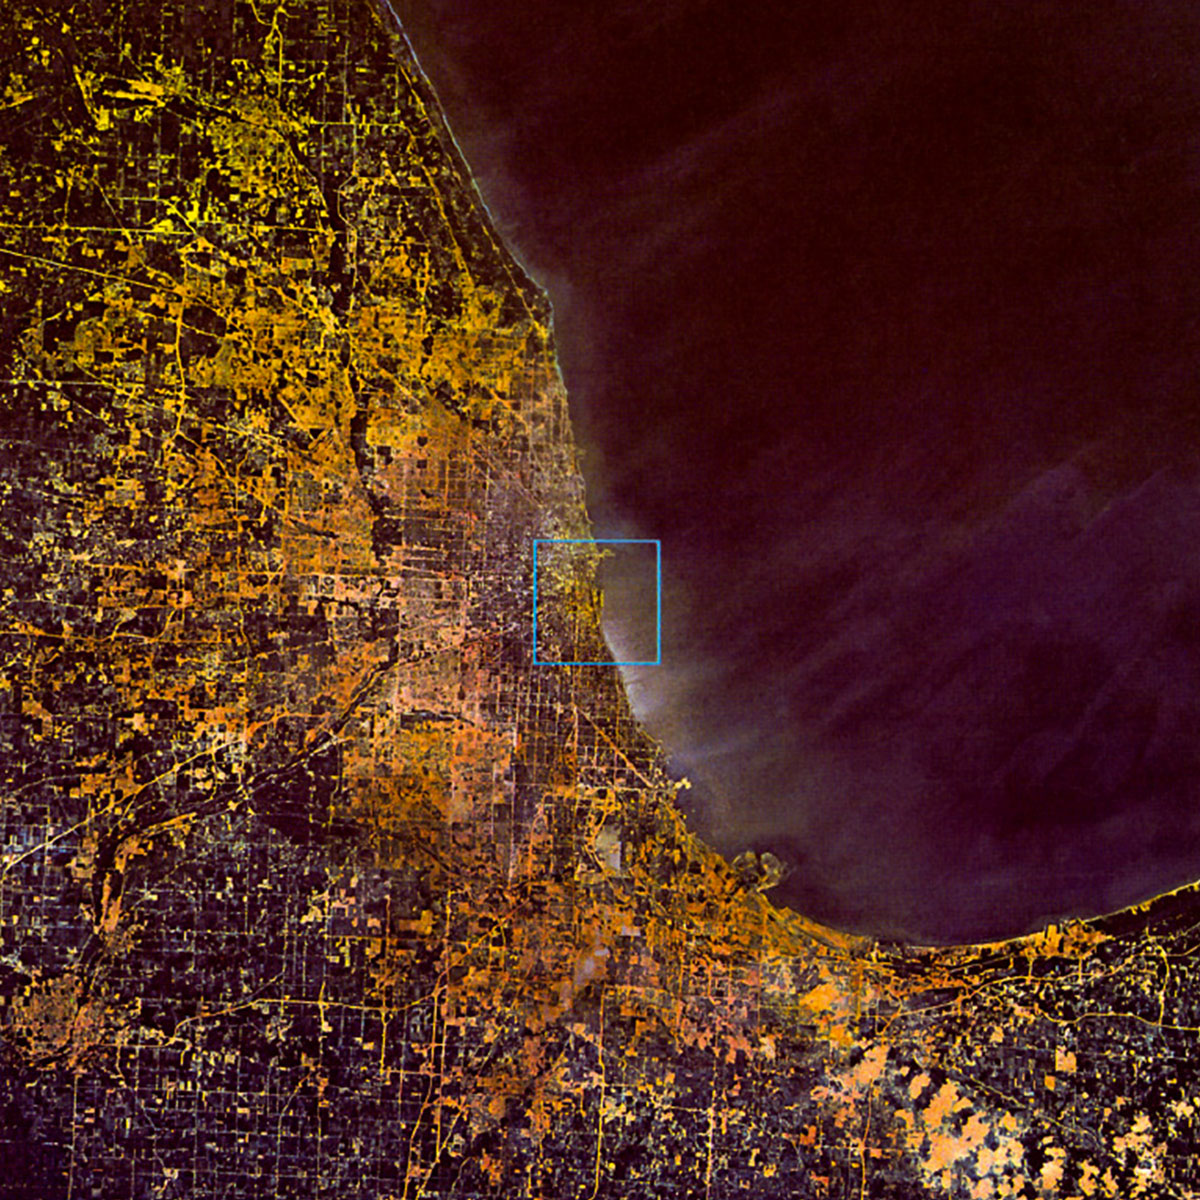 A photograph of a coastline at night show from above, from the nineteen eighty-two book version of “Powers of Ten,” by Philip and Phylis Morrison and the Office of Charles and Ray Eames.